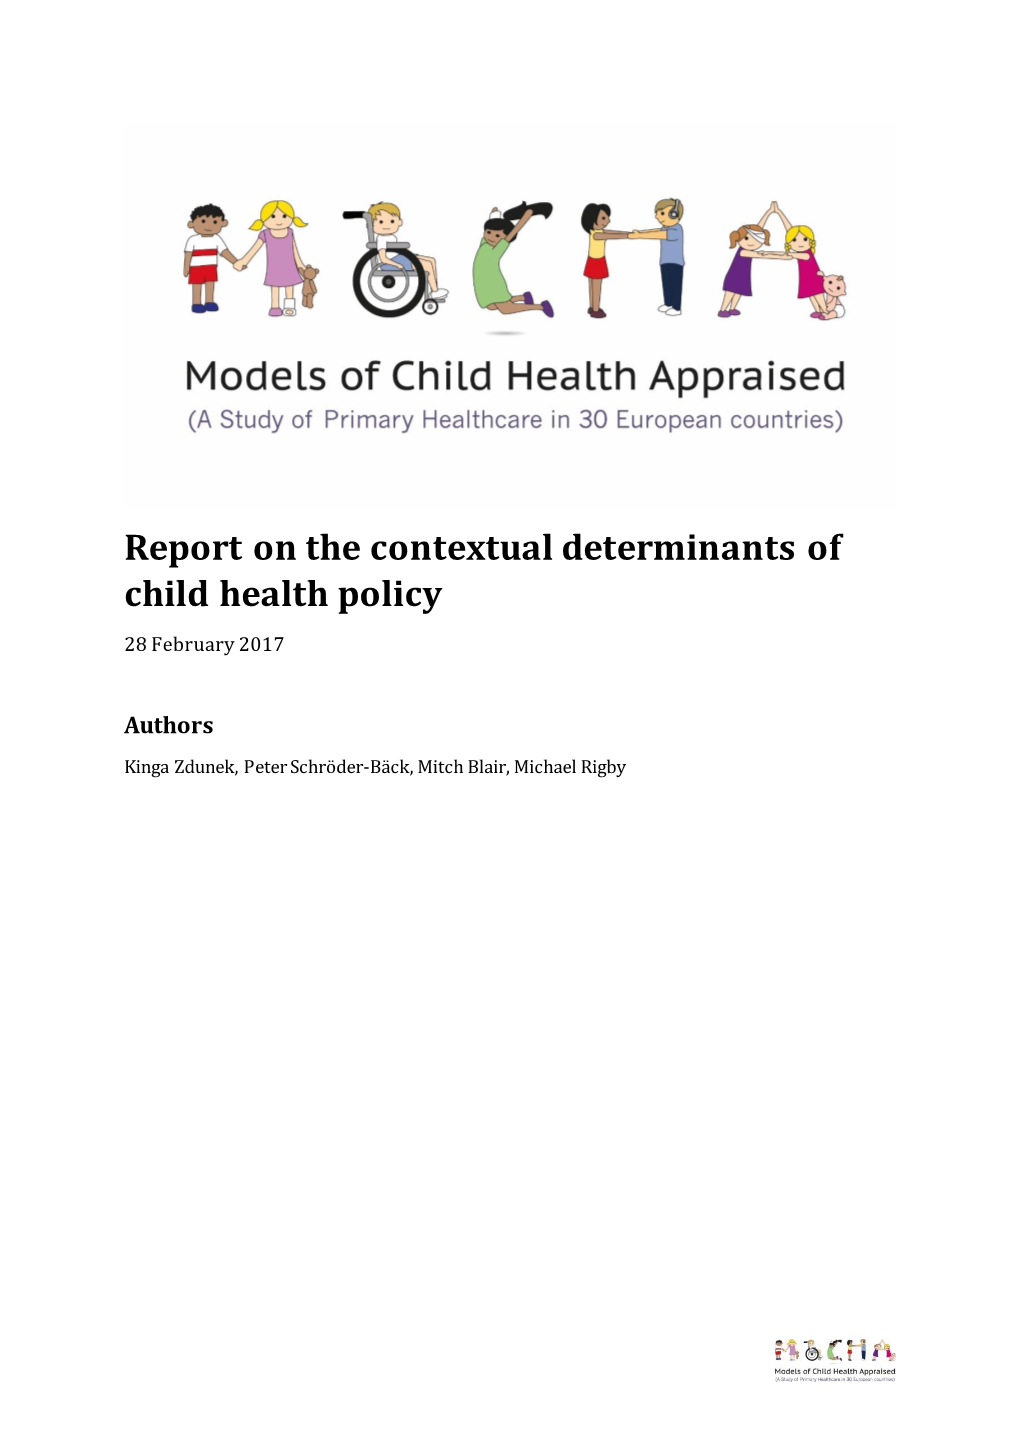 Report on the Contextual Determinants of Child Health Policy